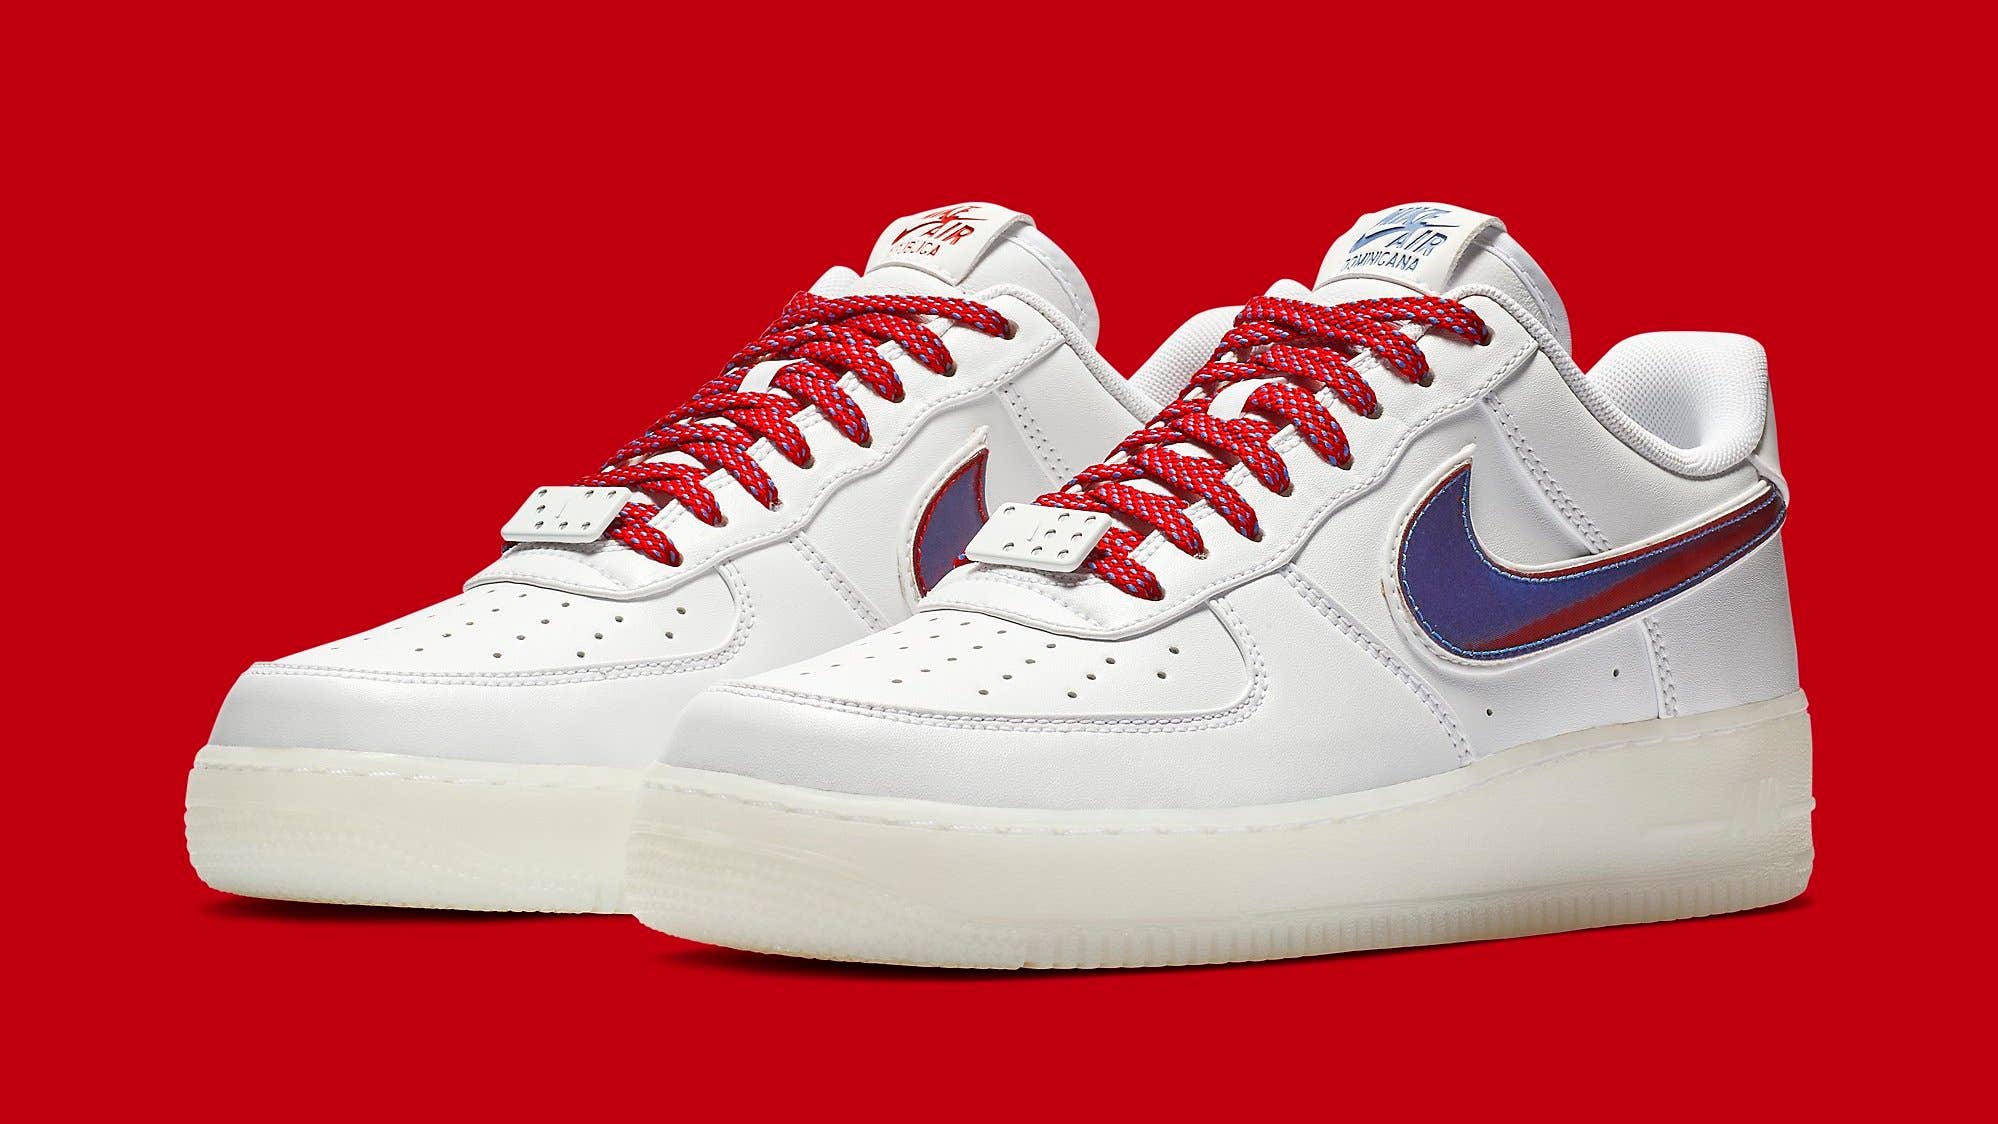 uniek audit systematisch De Lo Mio' Nike Air Force 1 Lows Salute Dominican Culture | Complex